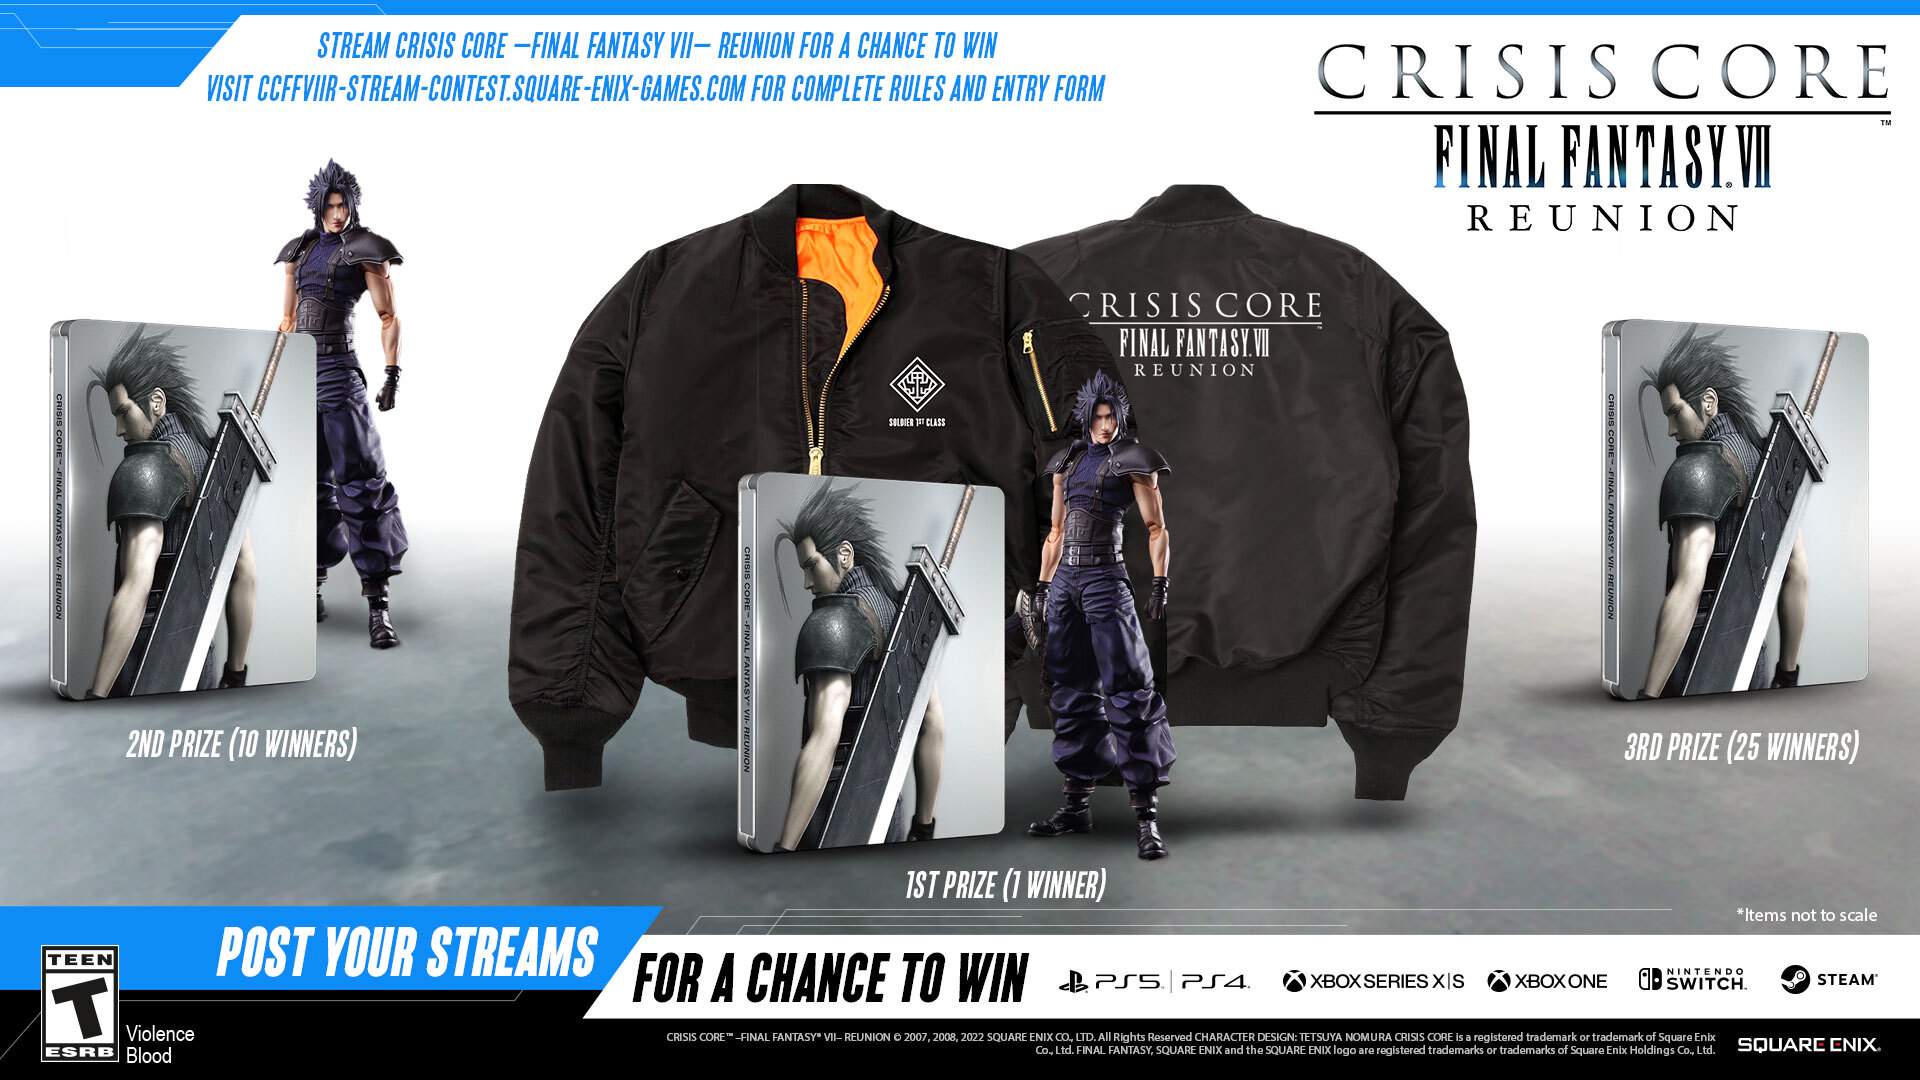 1st, 2nd, and 3rd prize shown for the Crisis Core streaming contest.